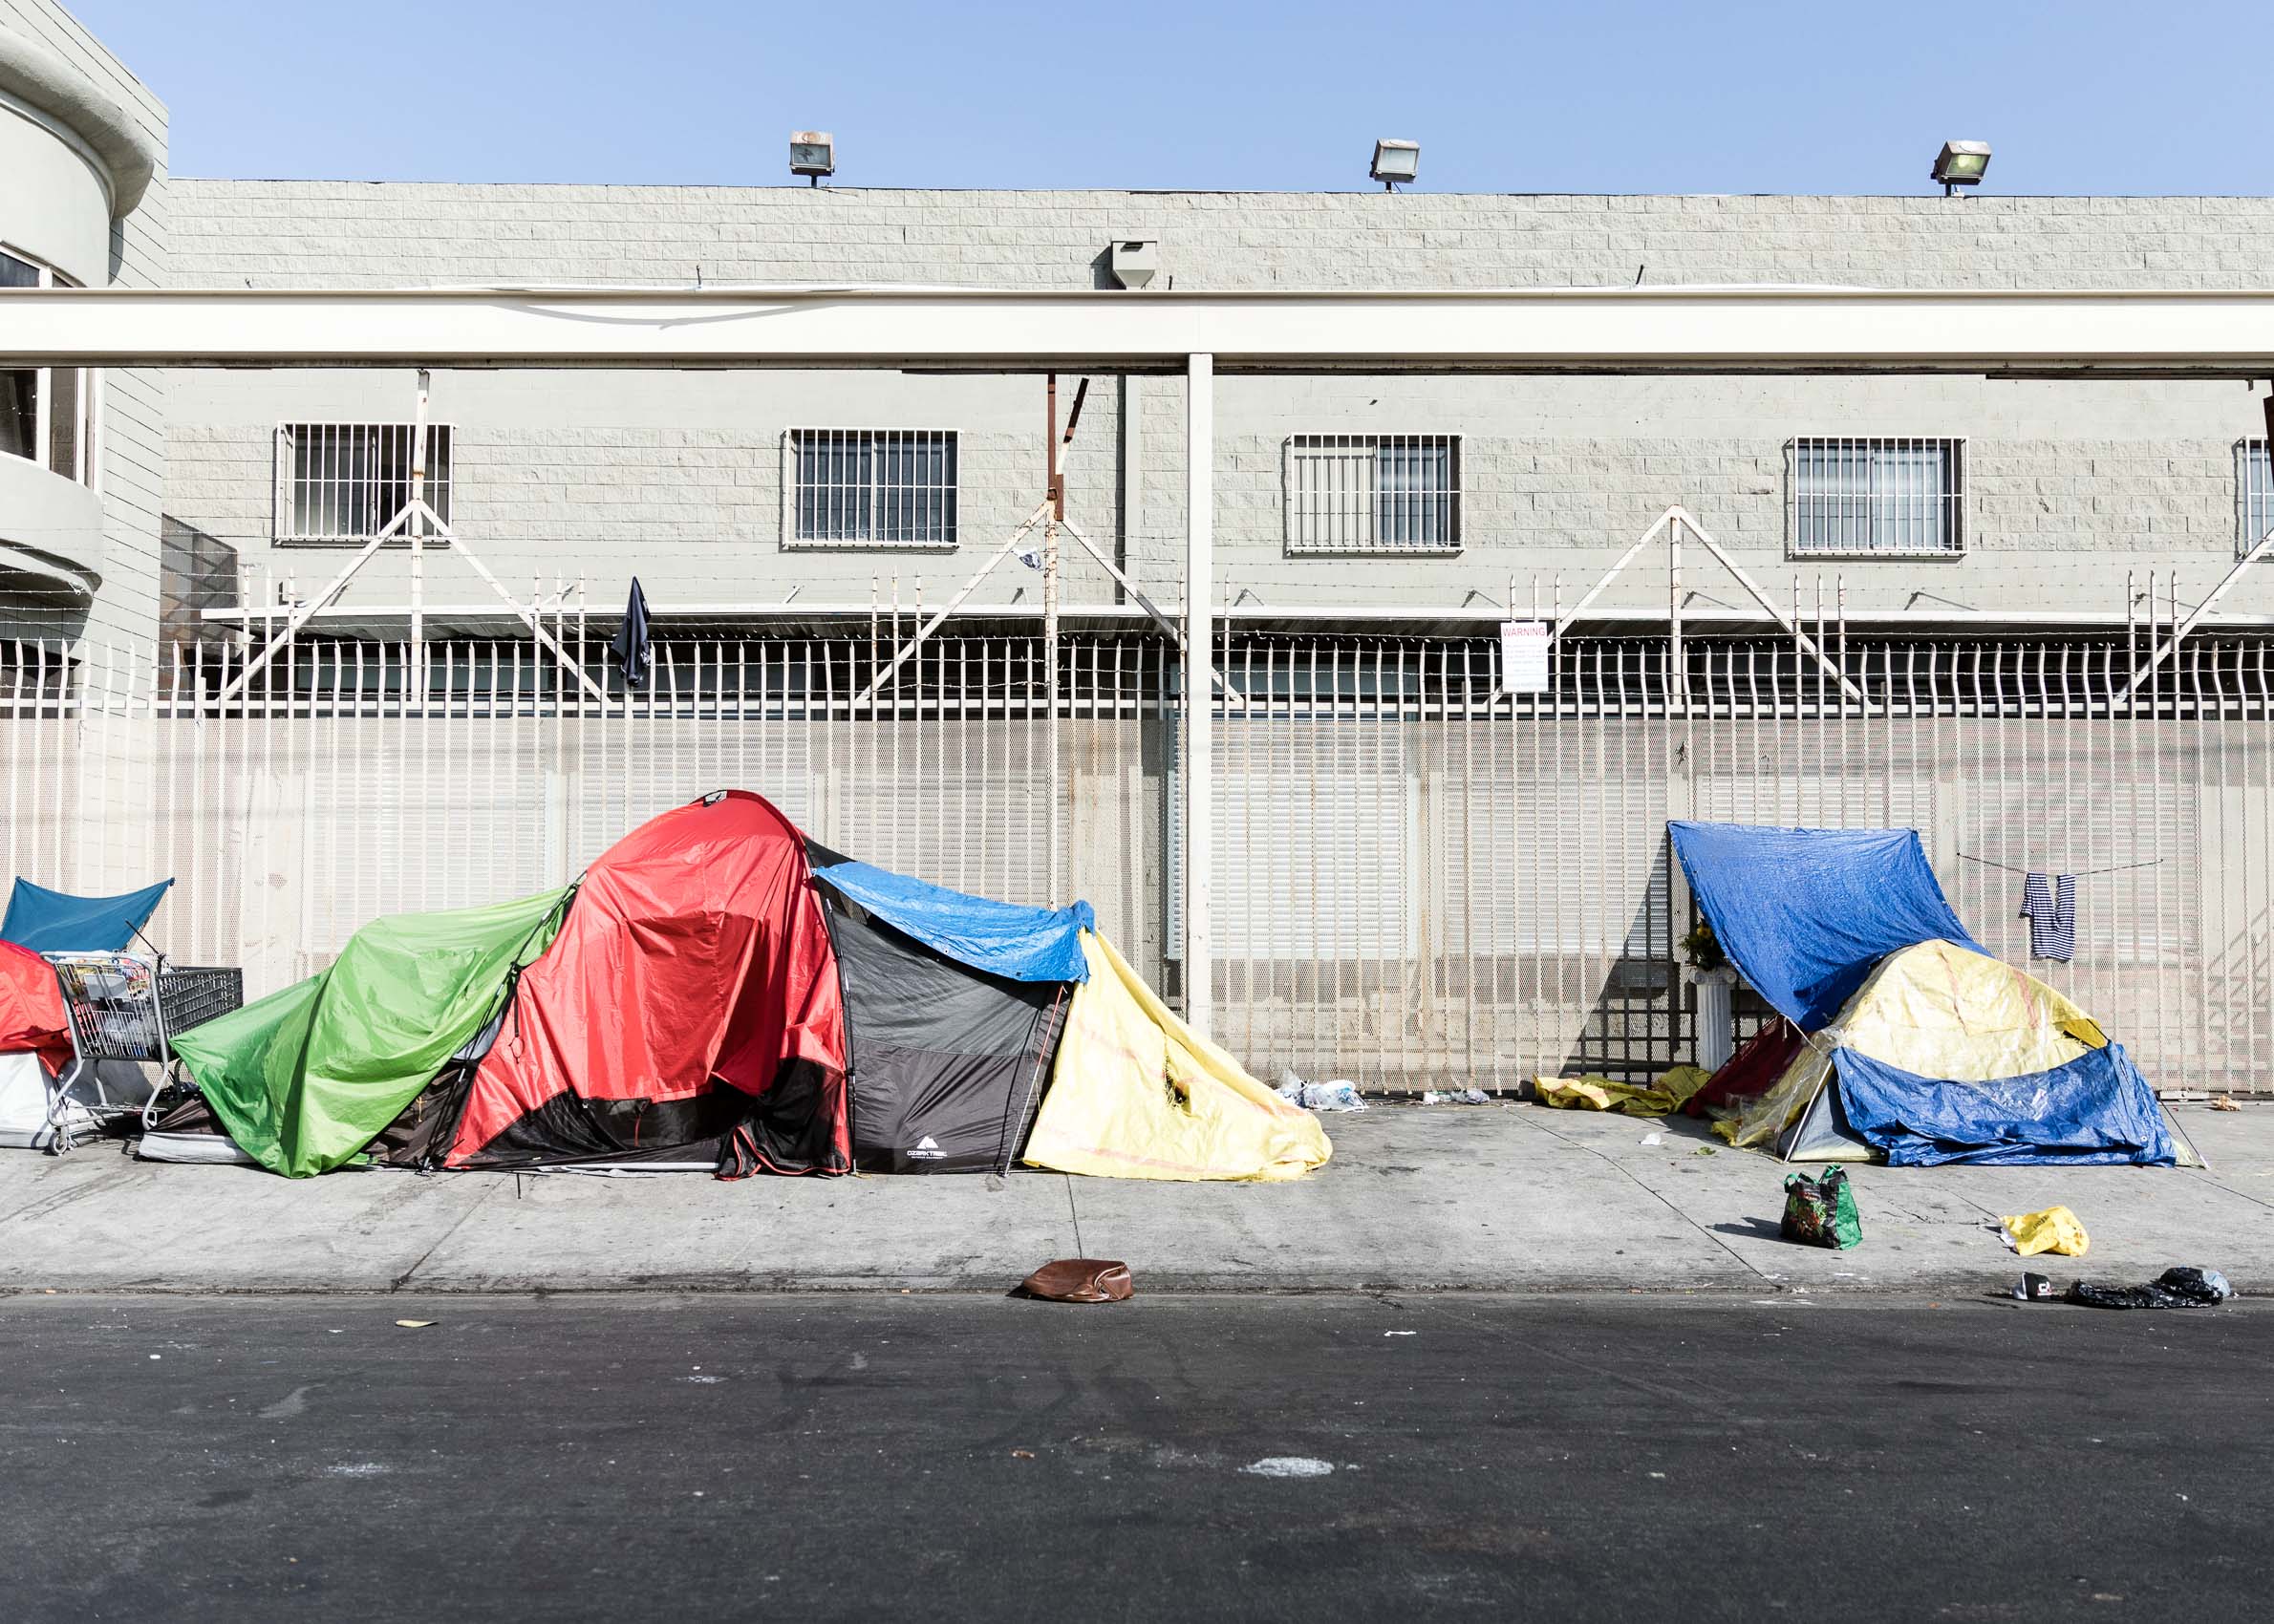  Skid Row | Los Angeles | Editorial and Commercial Photographer Patrick Strattner